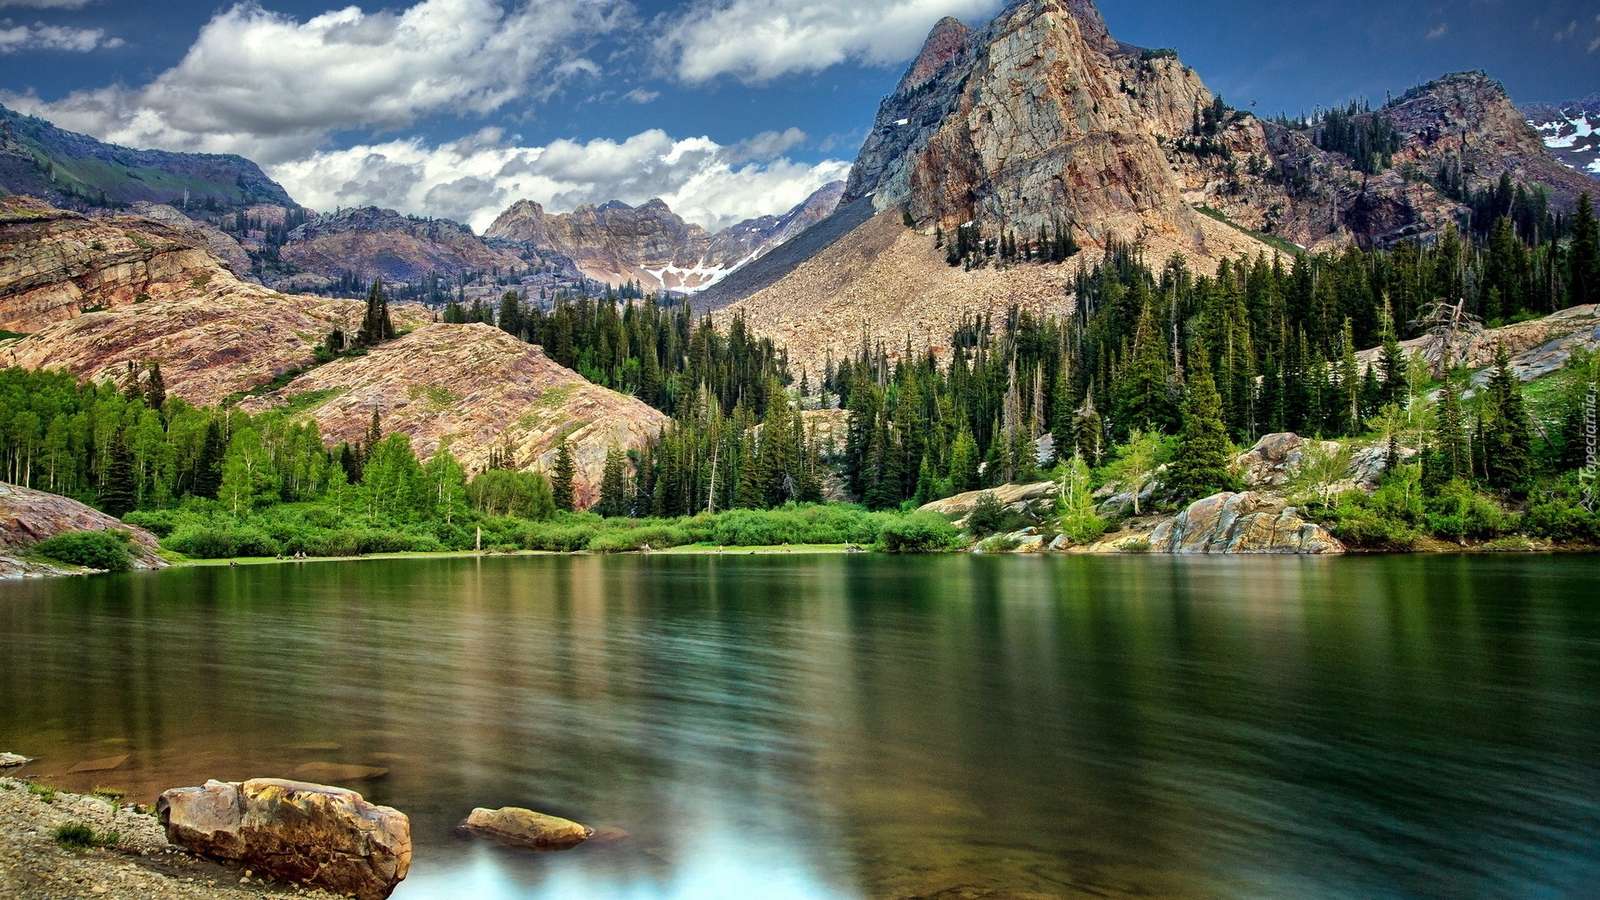 Lake near the mountains jigsaw puzzle online